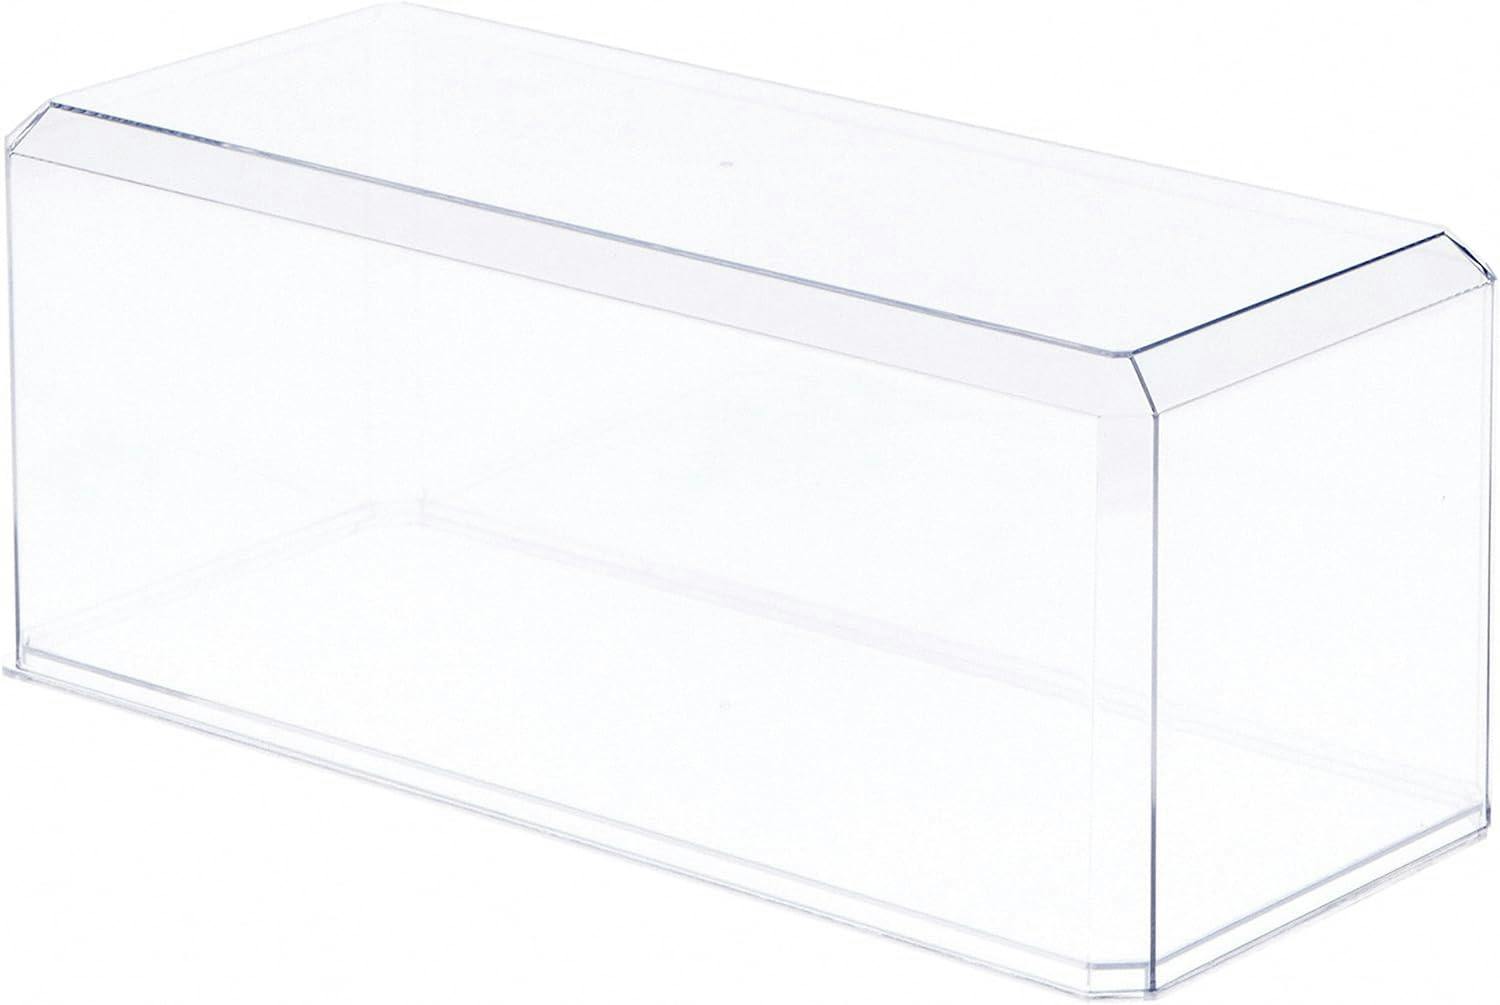 Crystal Clear Polystyrene Display Case for Collectibles 13"x5.5"